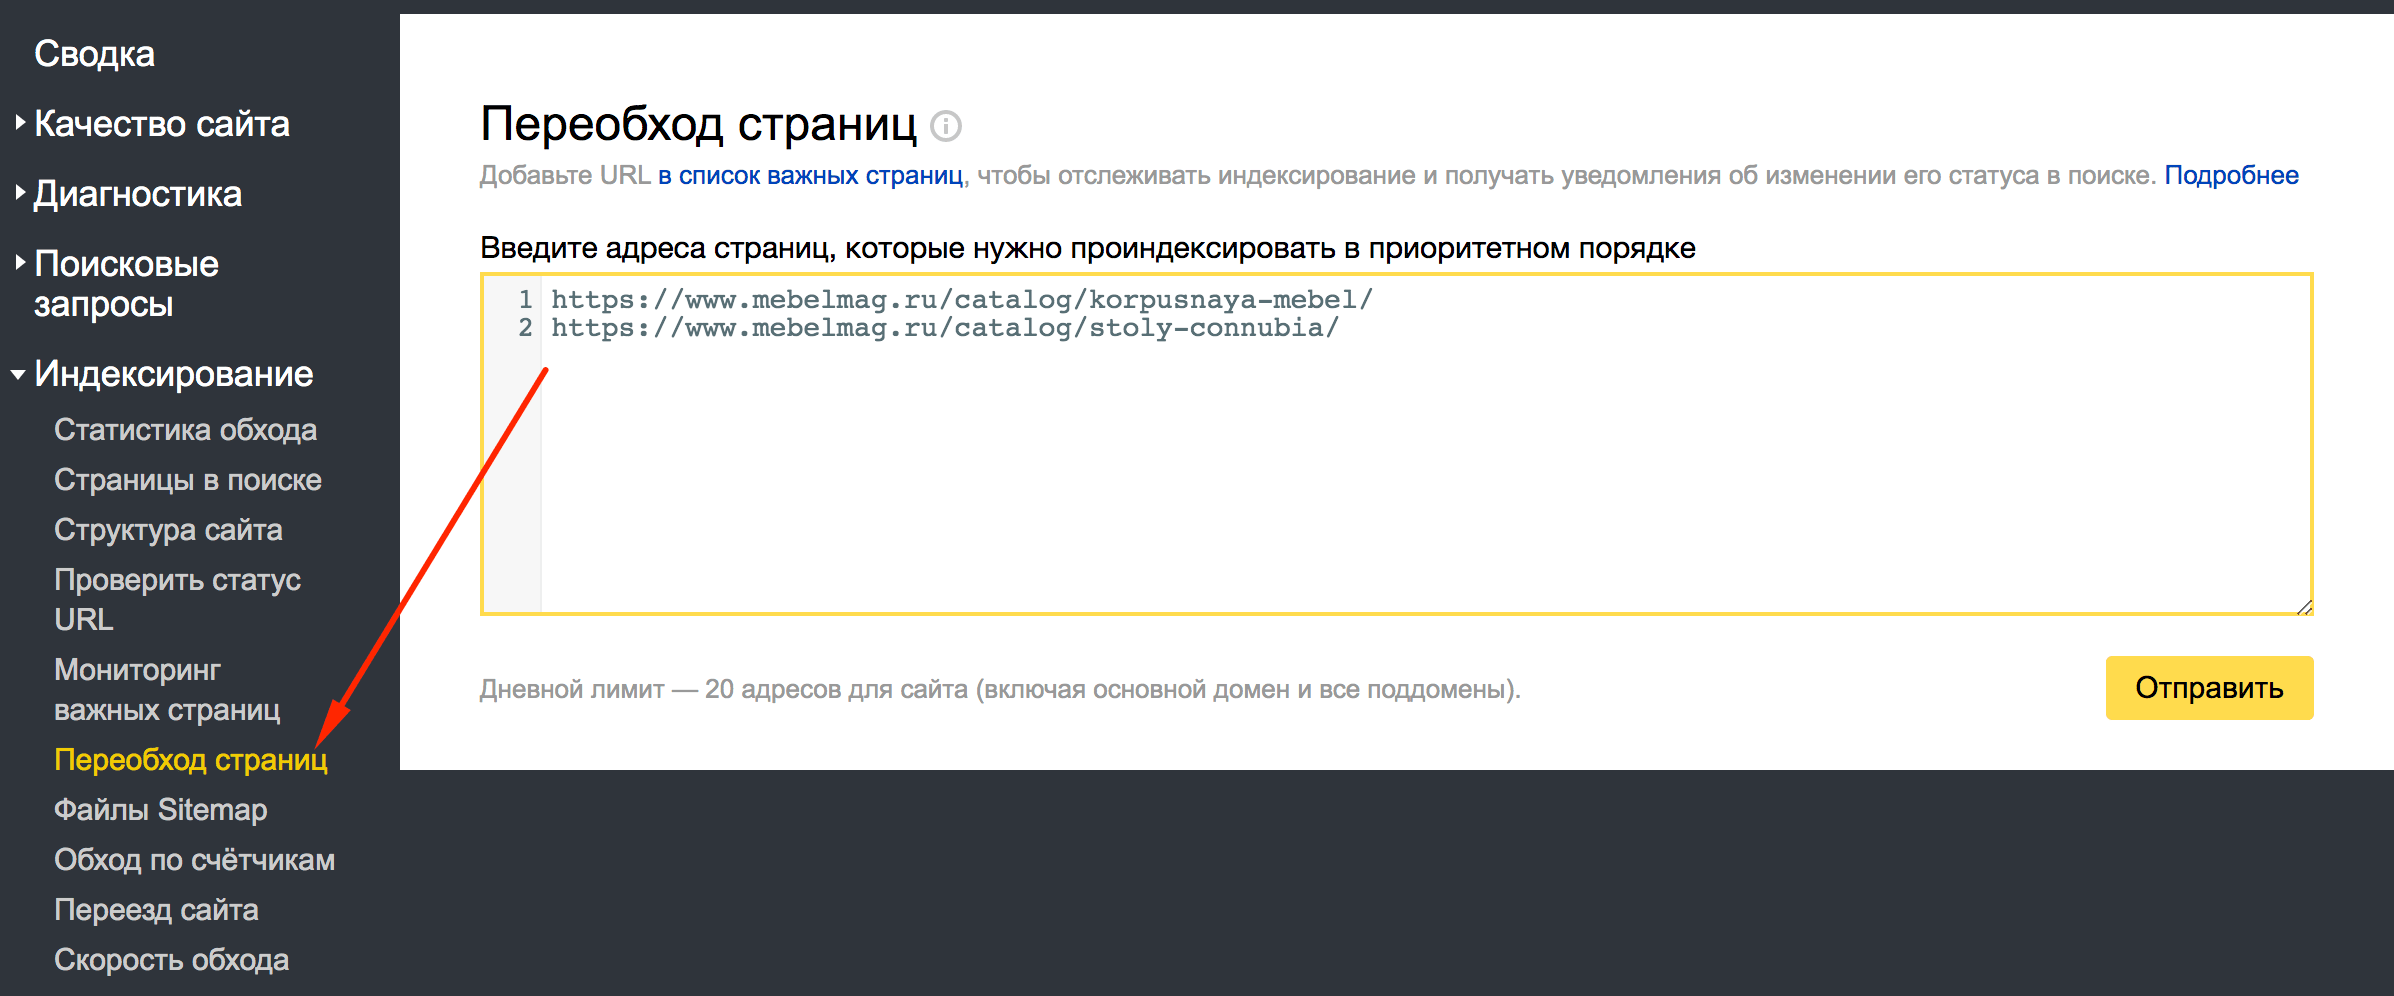 crawling pages in Yandex